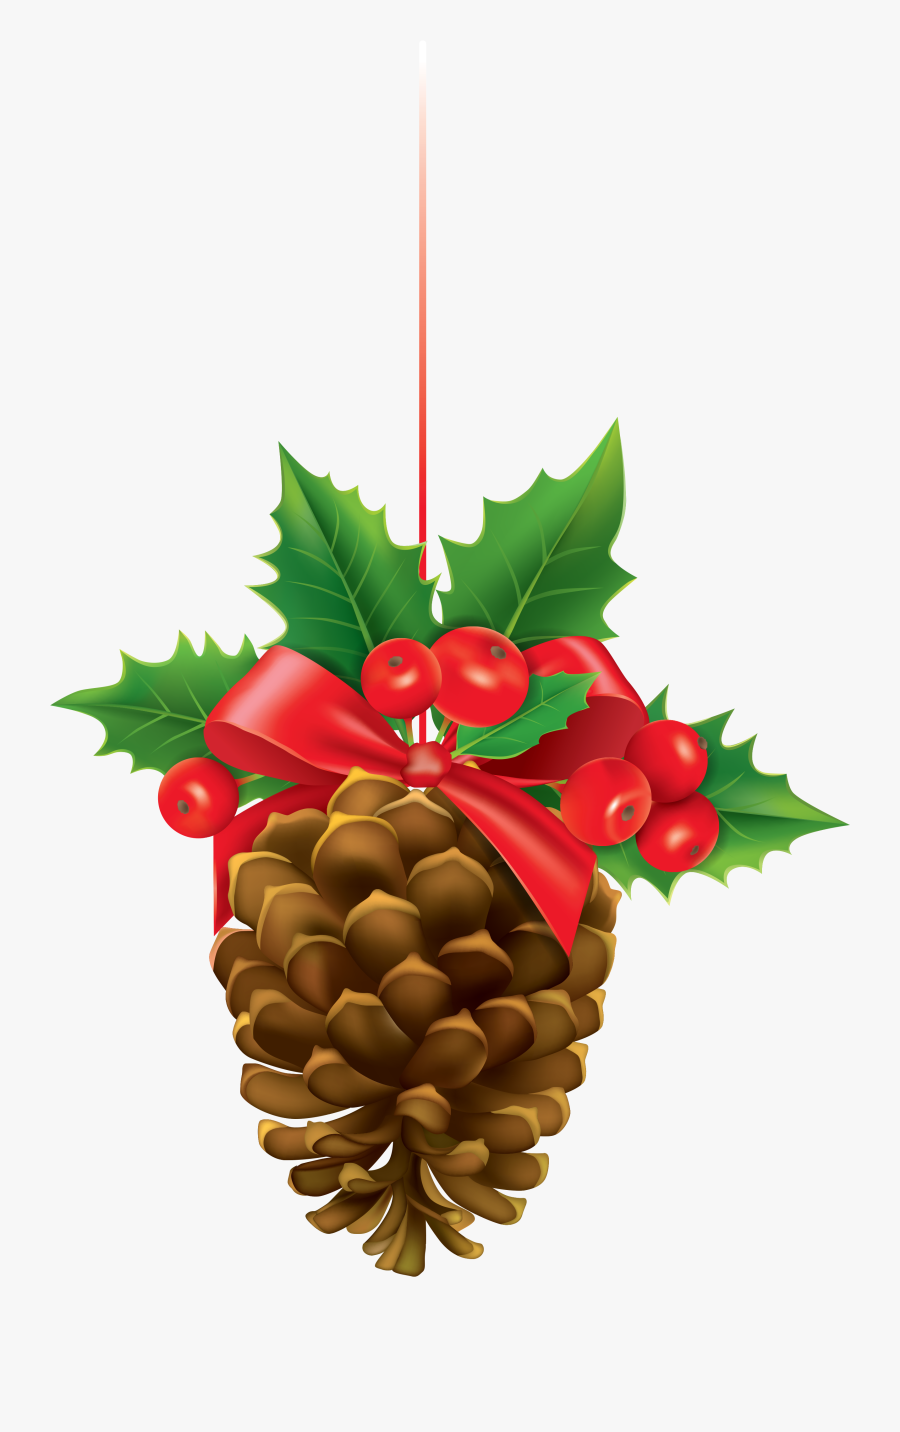 Christmas Pinecone With Mistletoe Clipart Image - Christmas Pine Cone Clipart, Transparent Clipart